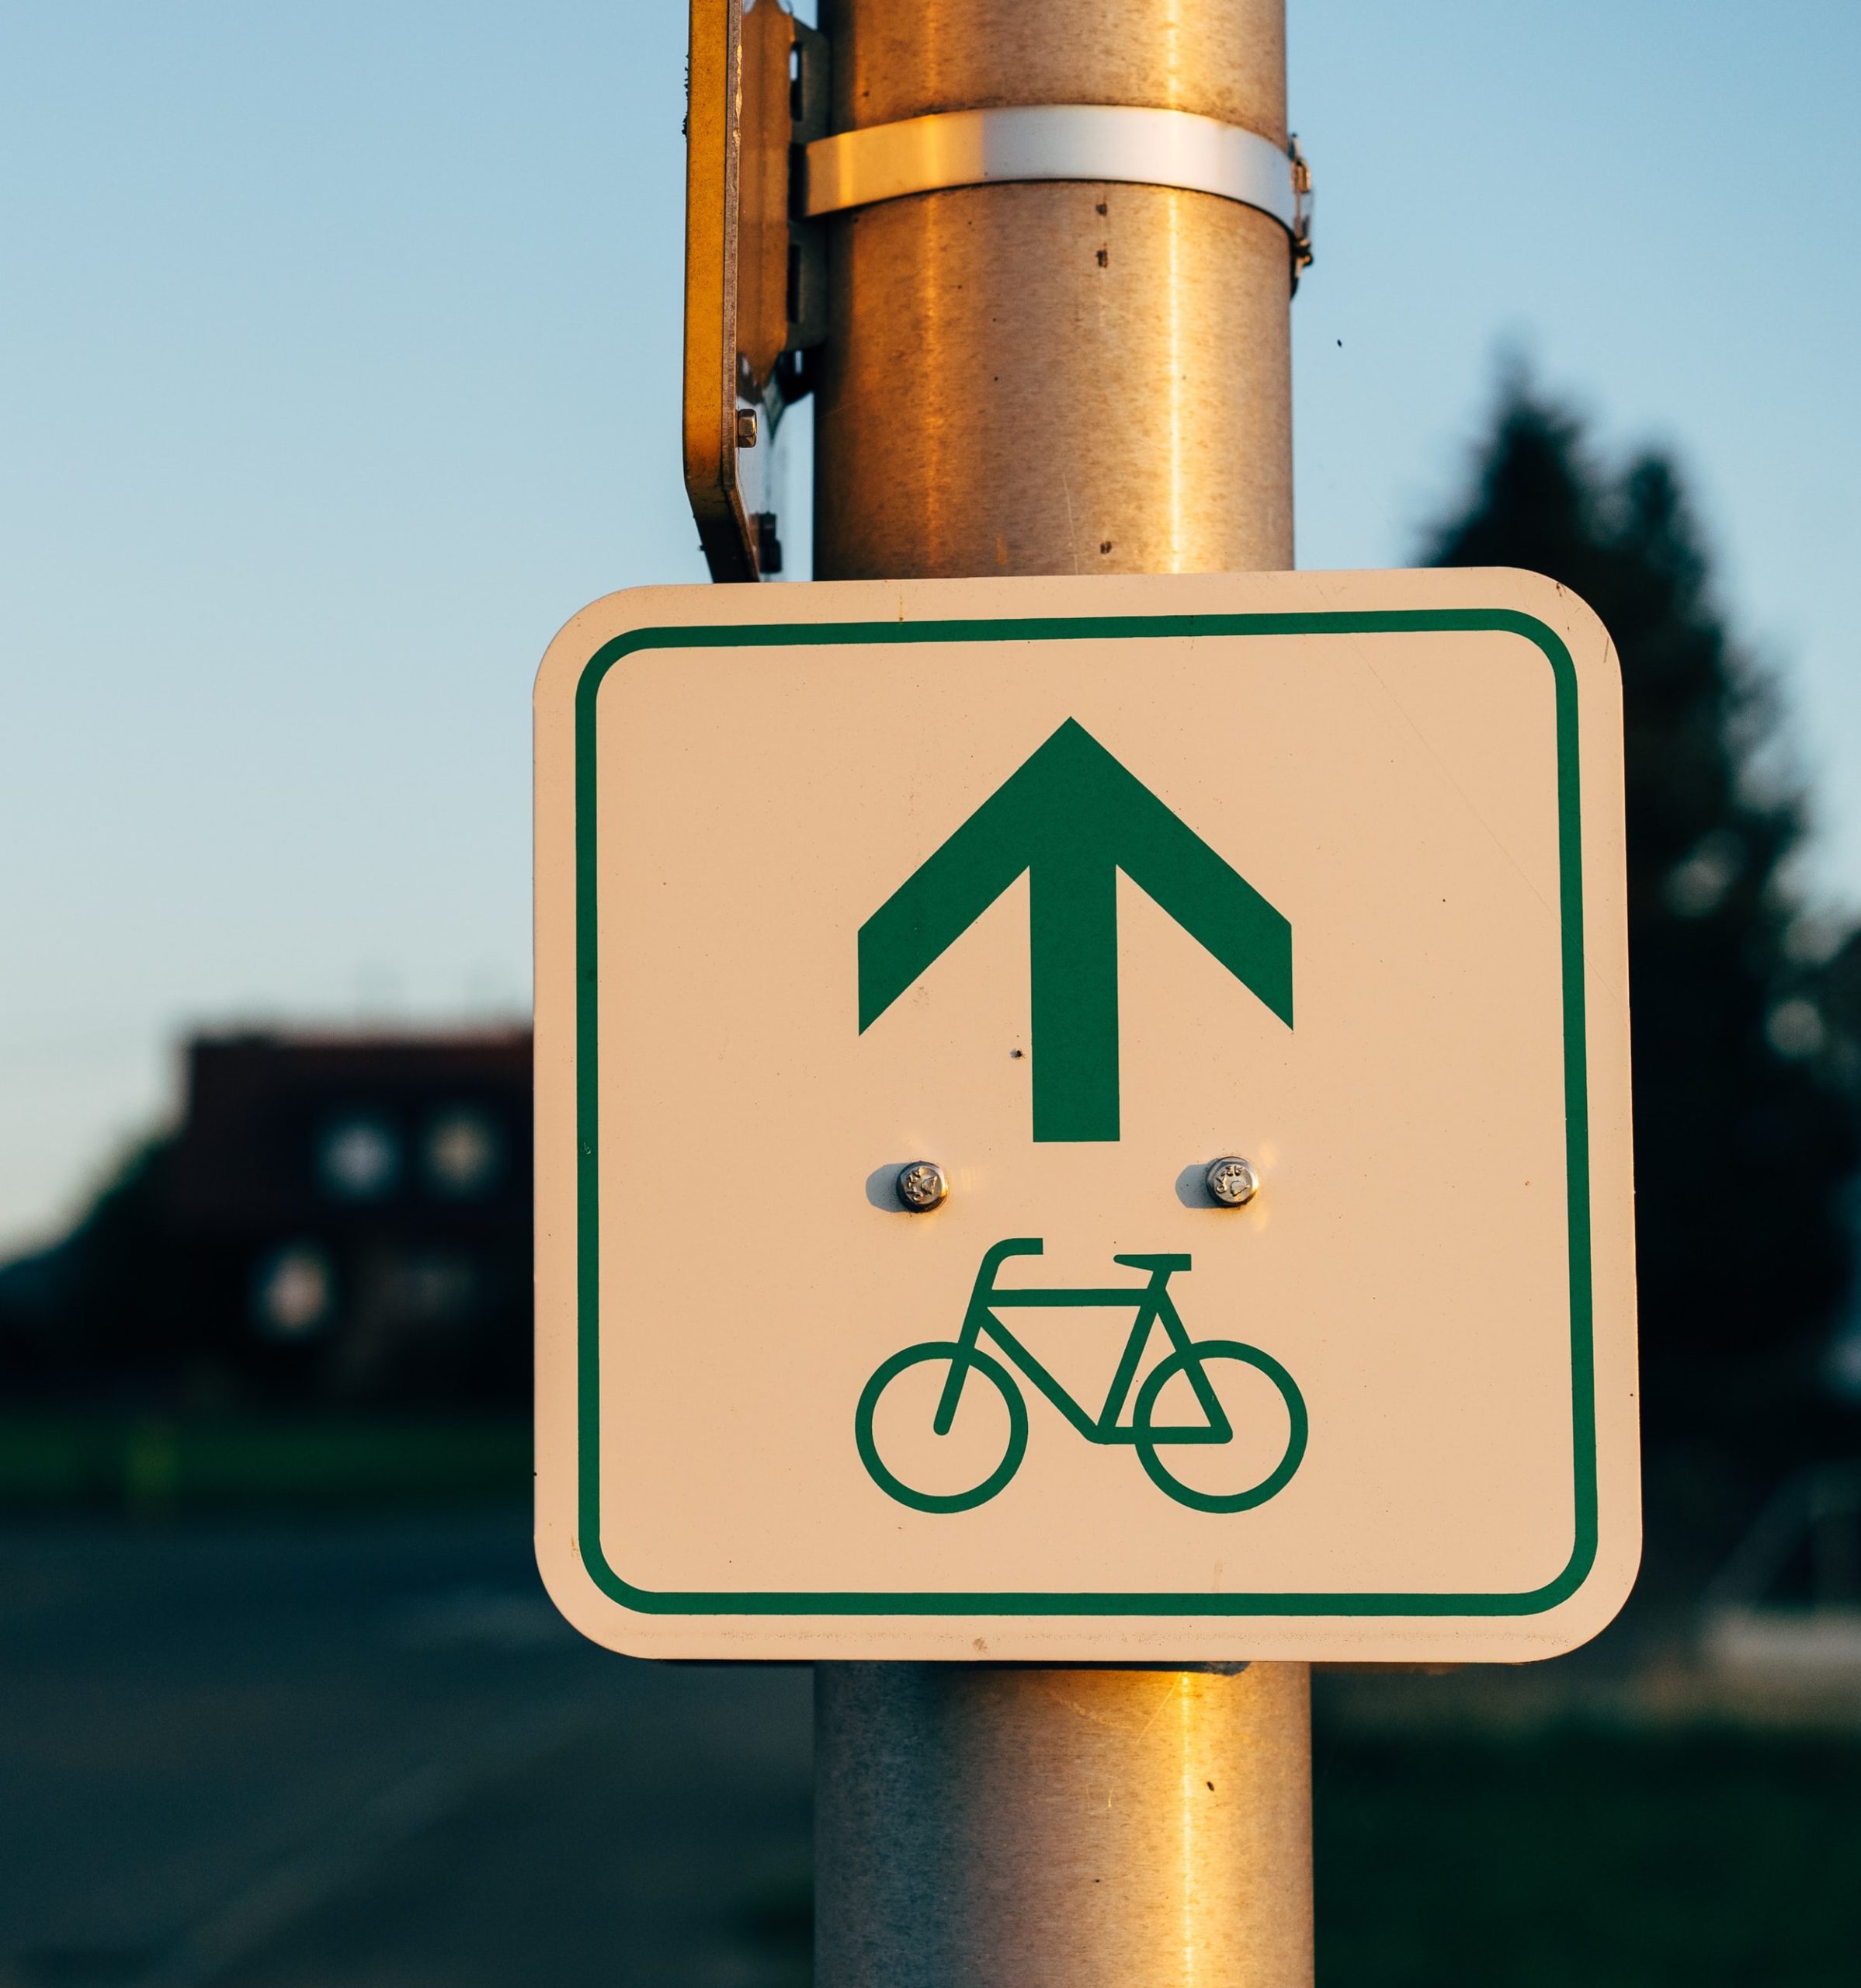 A transversal sign with a bicycle on it.